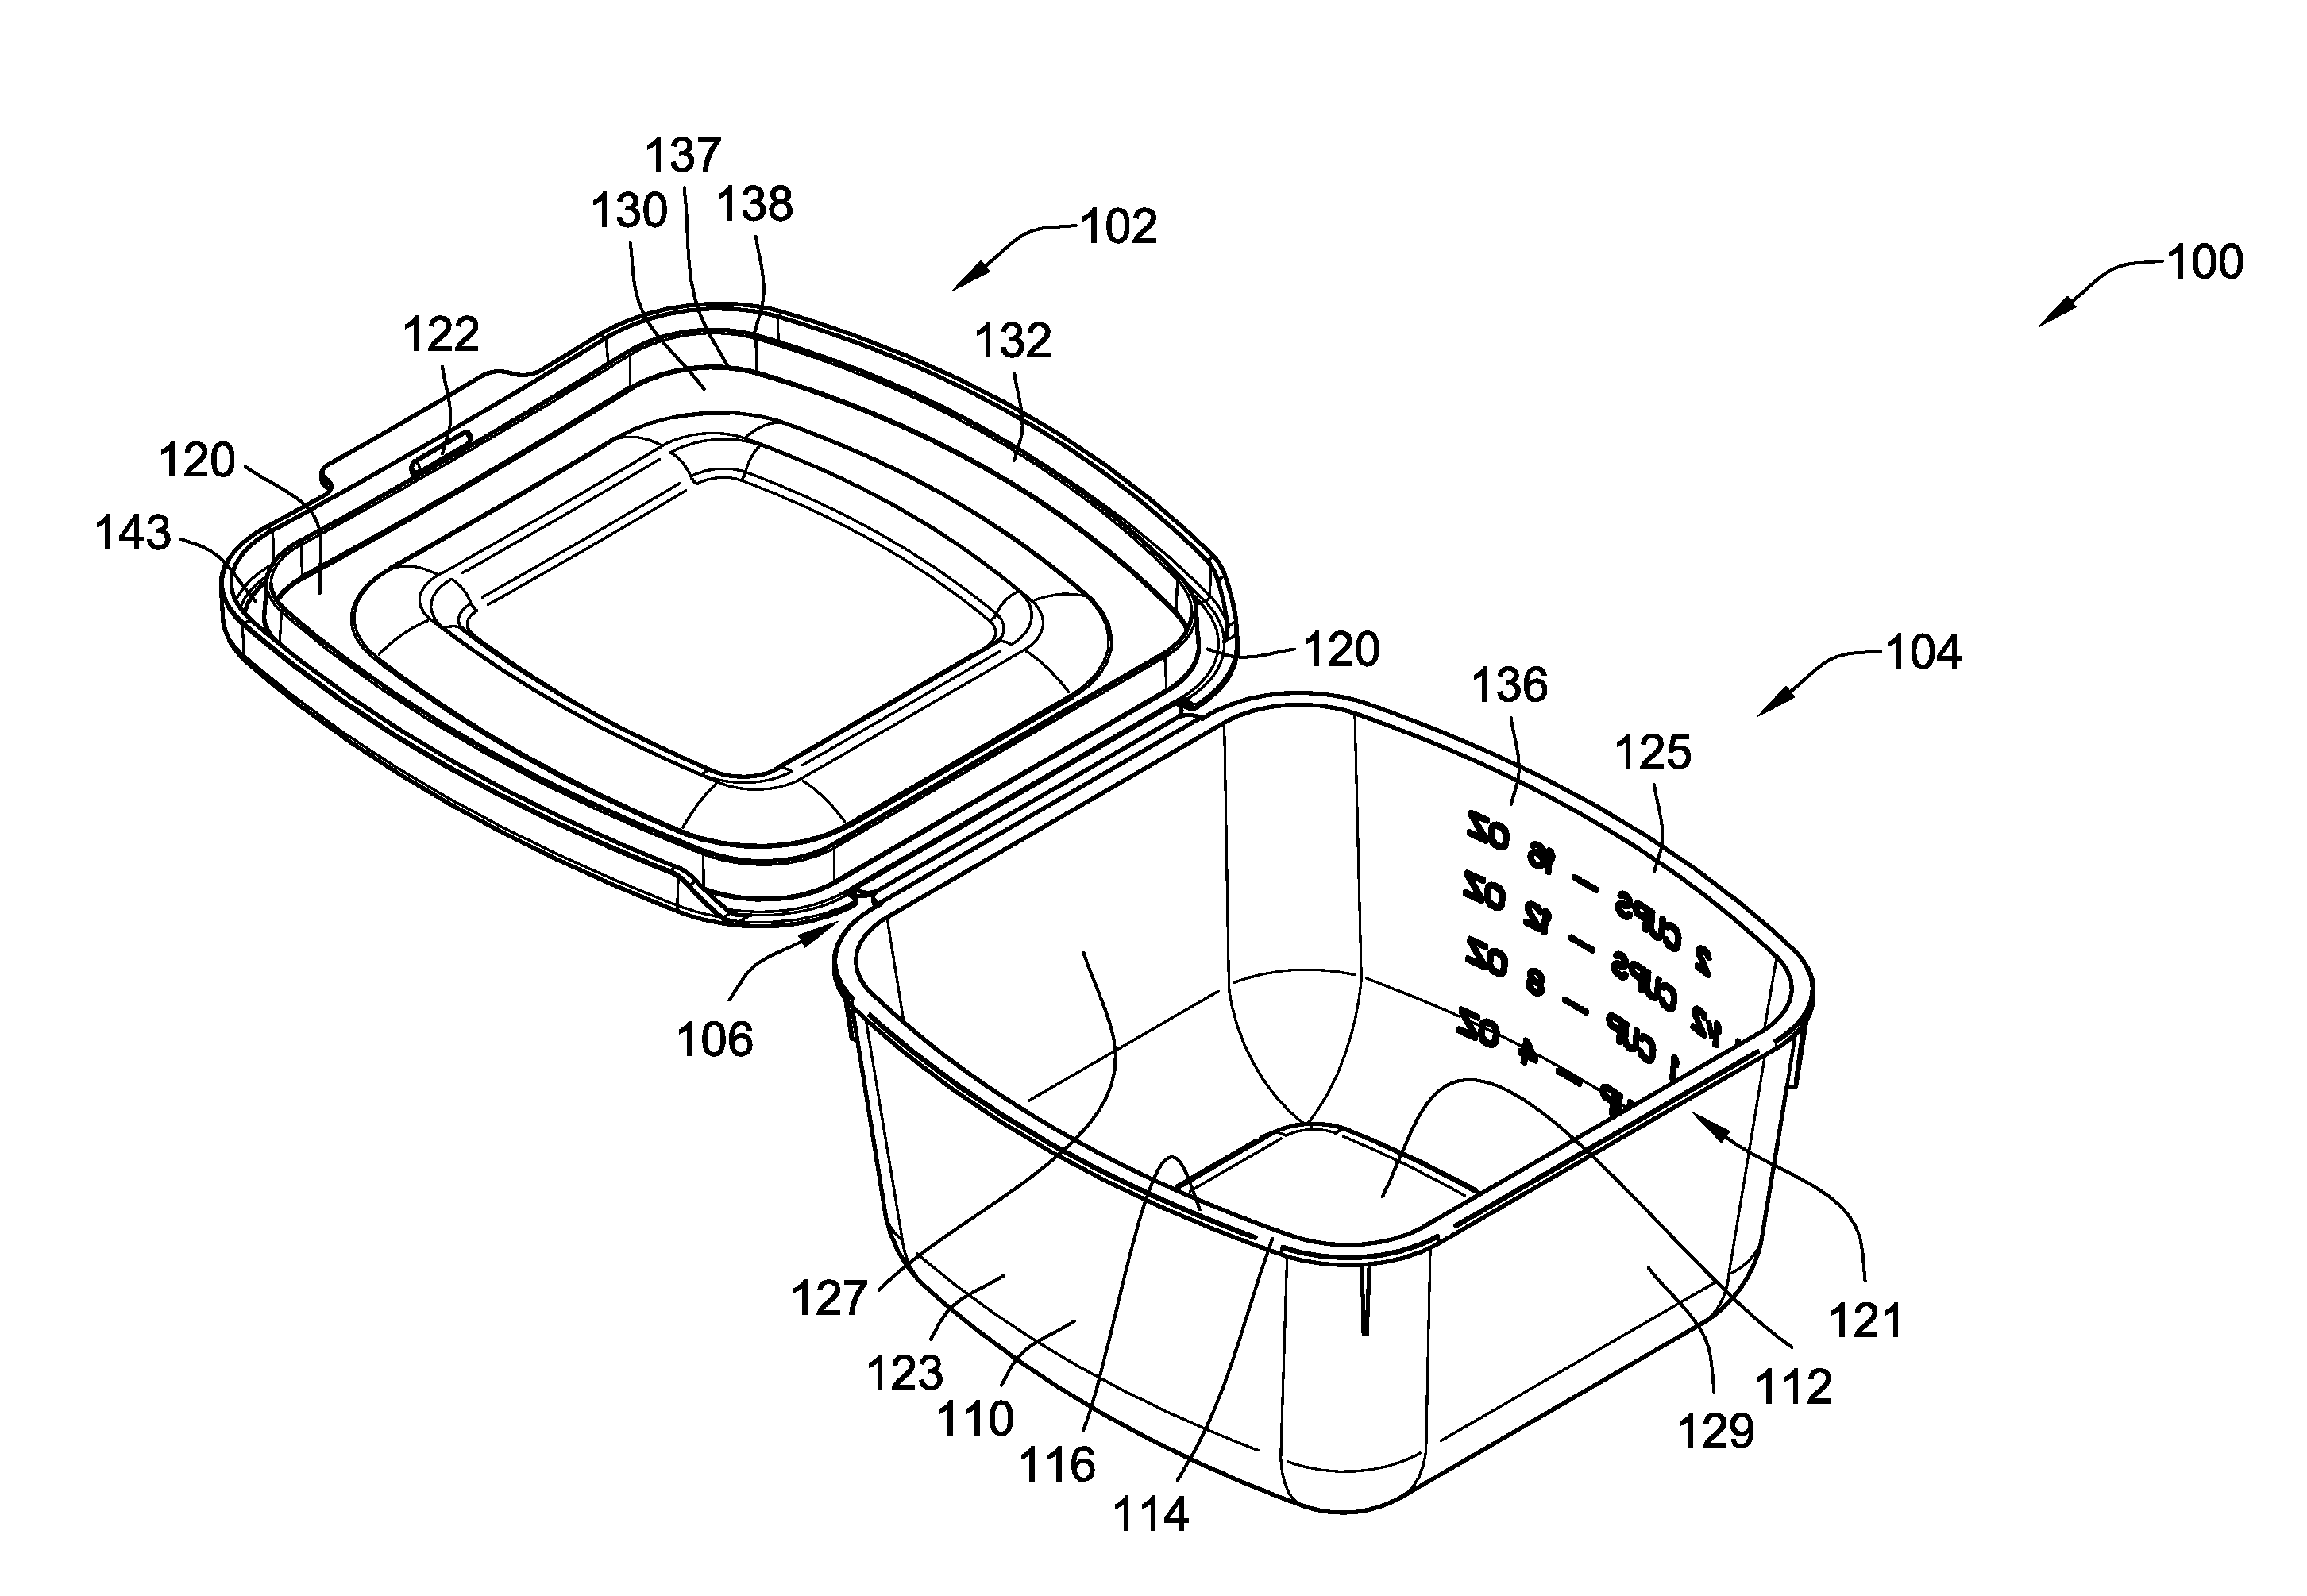 Container having a pre-curved lid